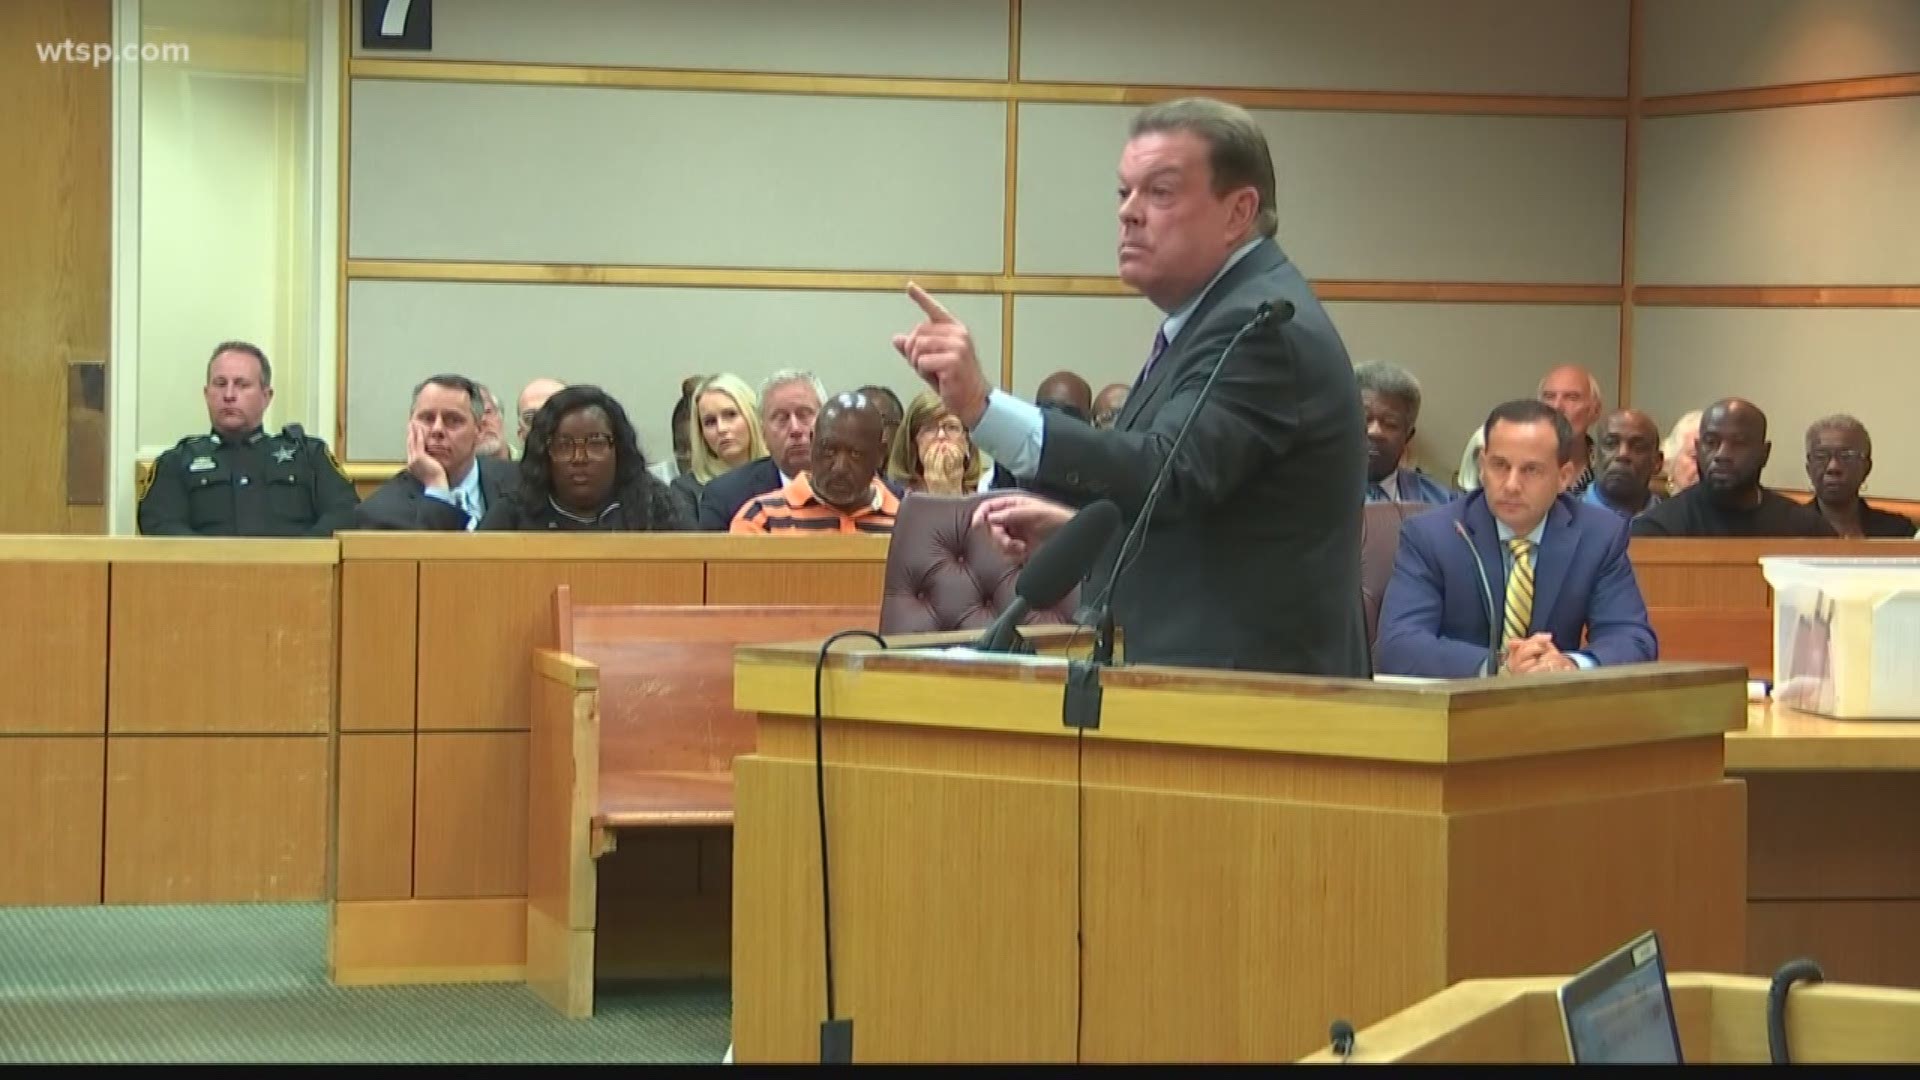 The trial of Clearwater convenience store shooter Michael Drejka begins Wednesday morning in Pinellas County.

Five men and one woman have been seated on the jury tasked with deciding his fate. Drejka, 49, is charged with manslaughter in the 2018 death of Markeis McGlockton. Opening statements wrapped up Wednesday and testimony began by key witnesses in the parking lot shooting.